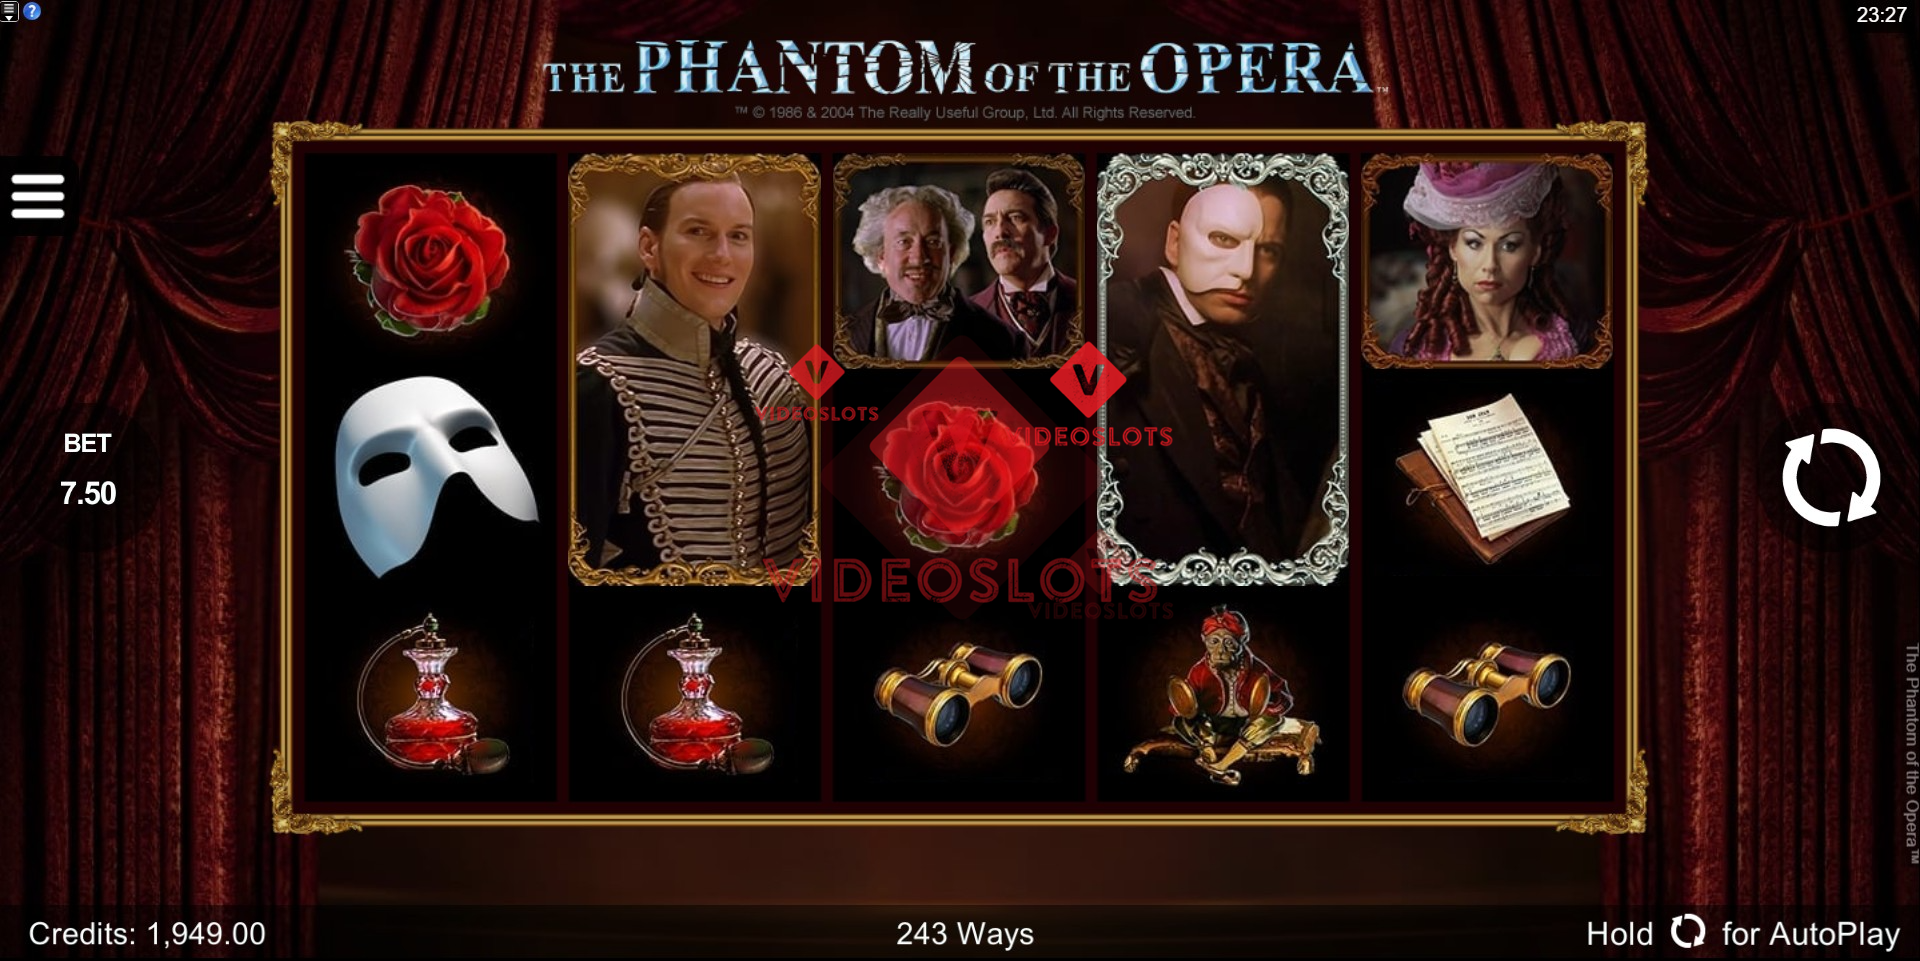 Base Game for The Phantom of the Opera slot for Microgaming